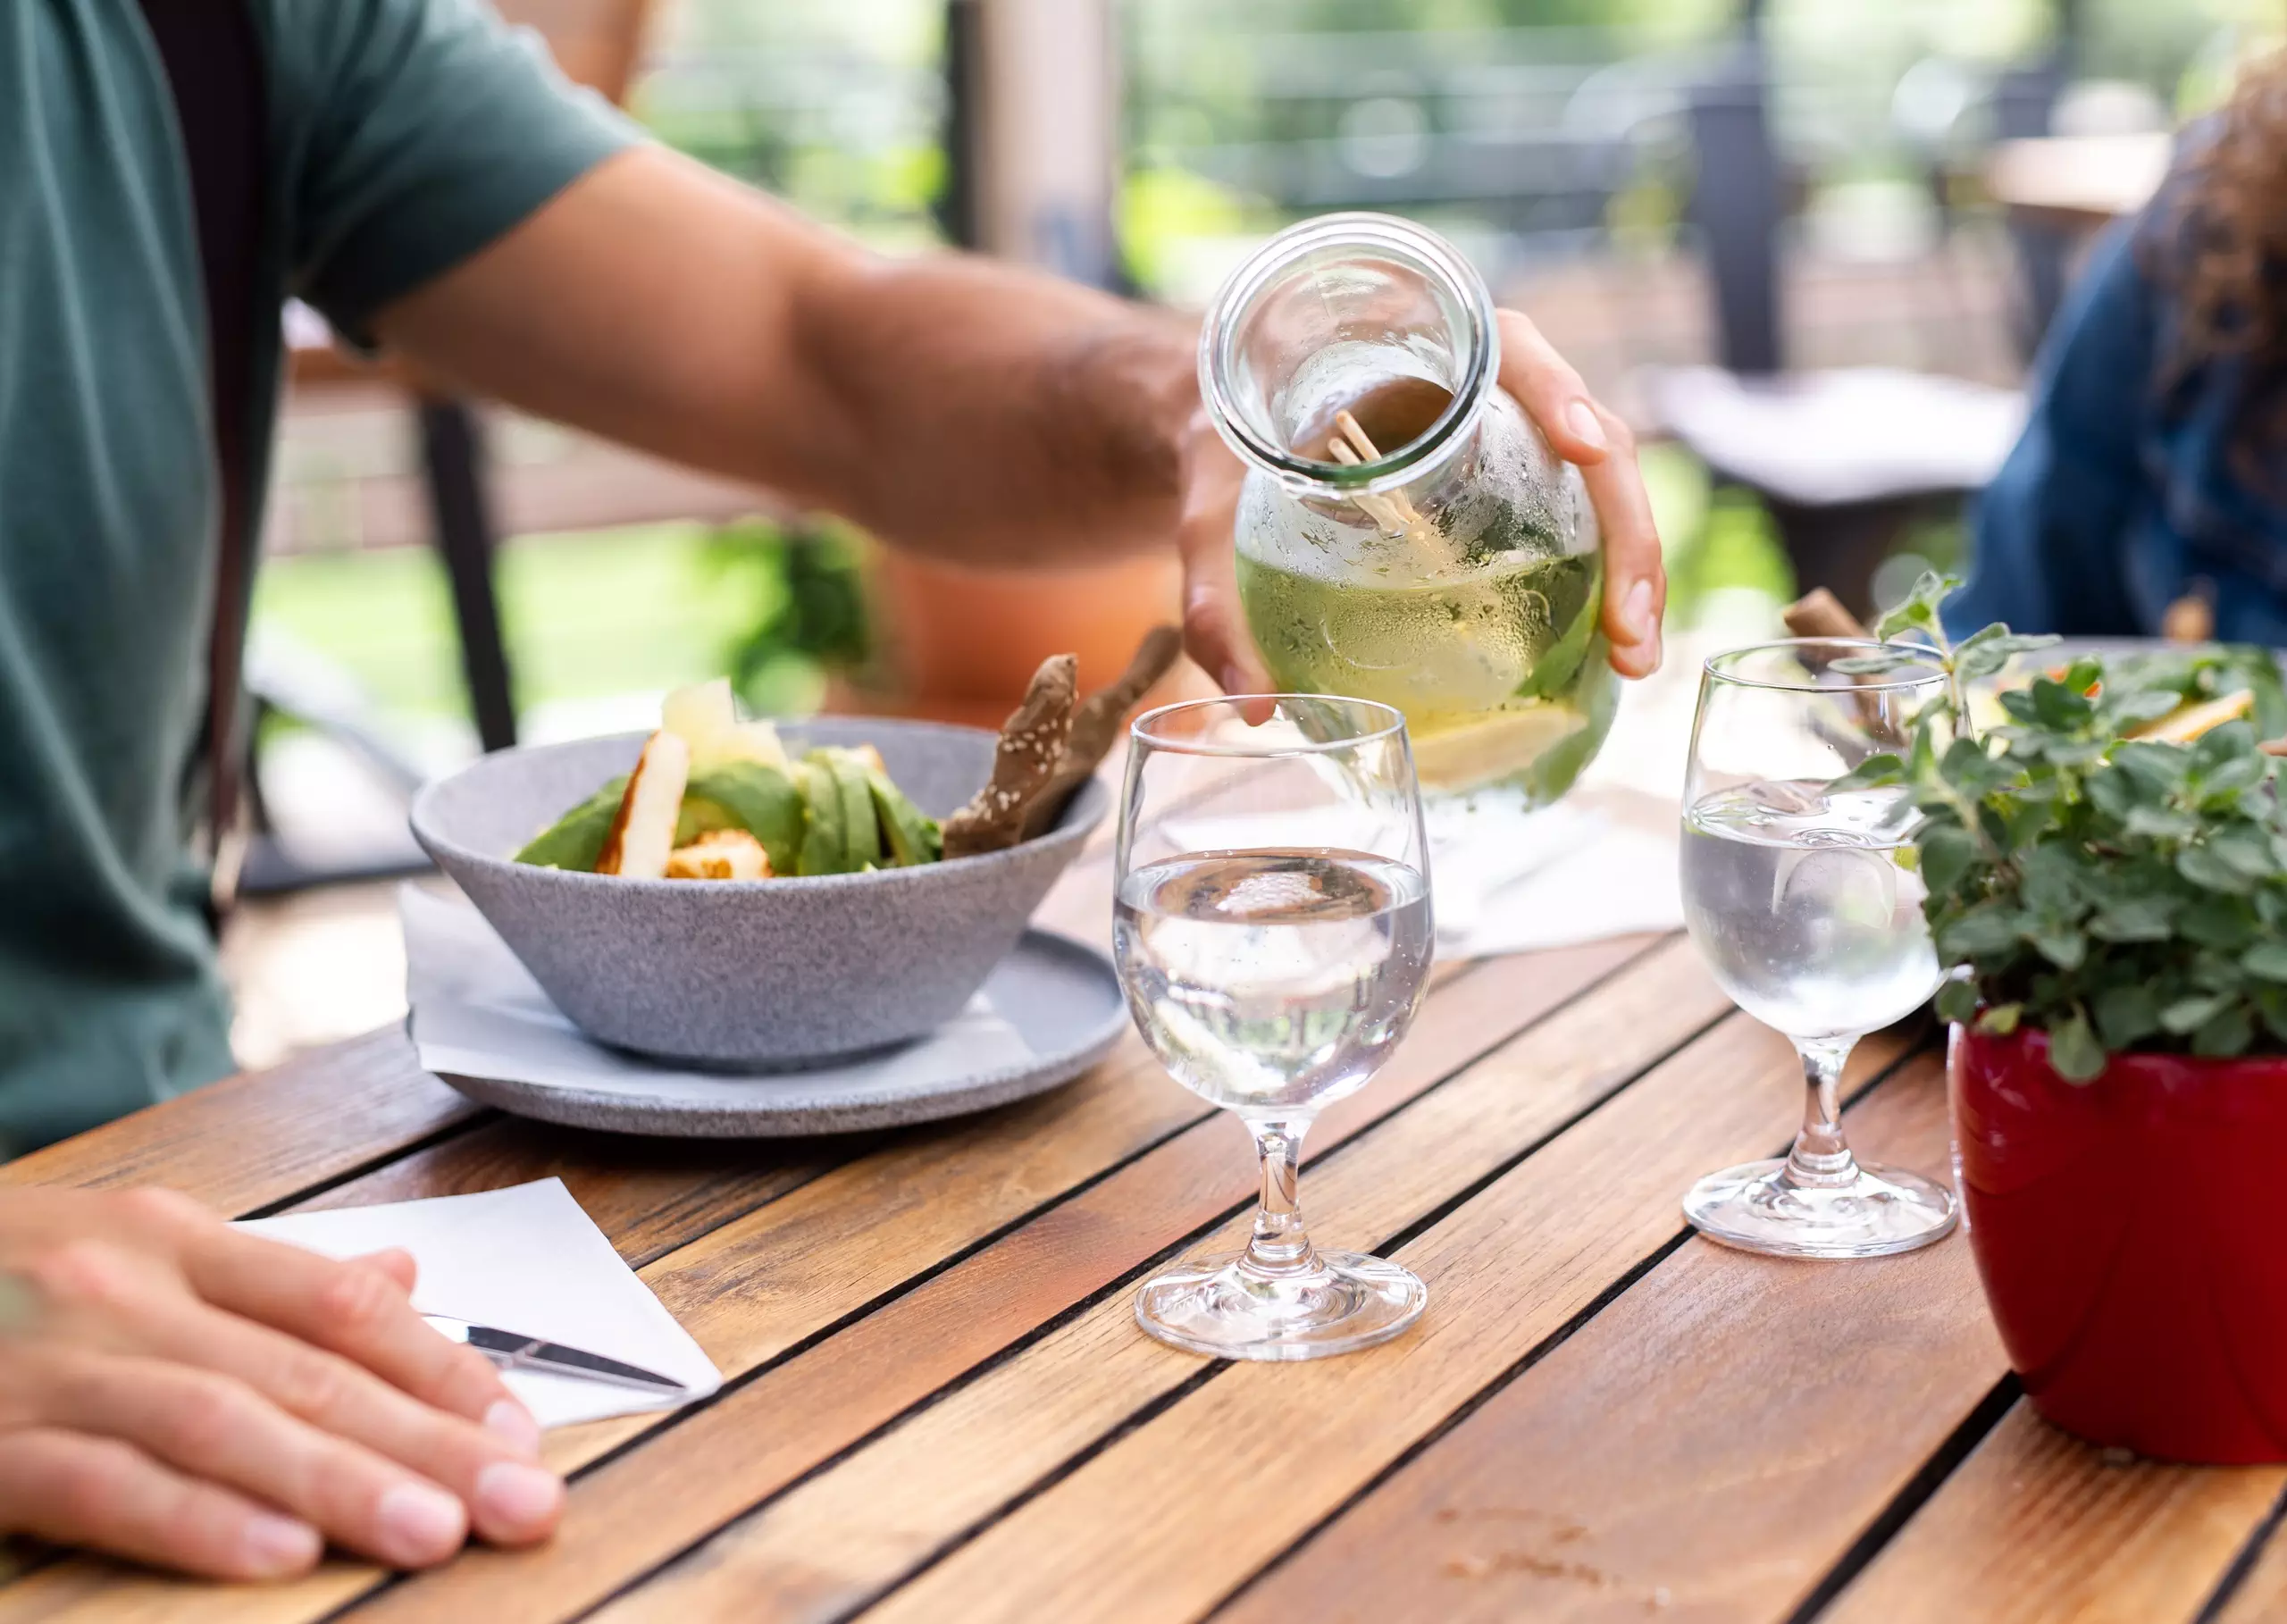 Pouring water at outdoor dining table with food.